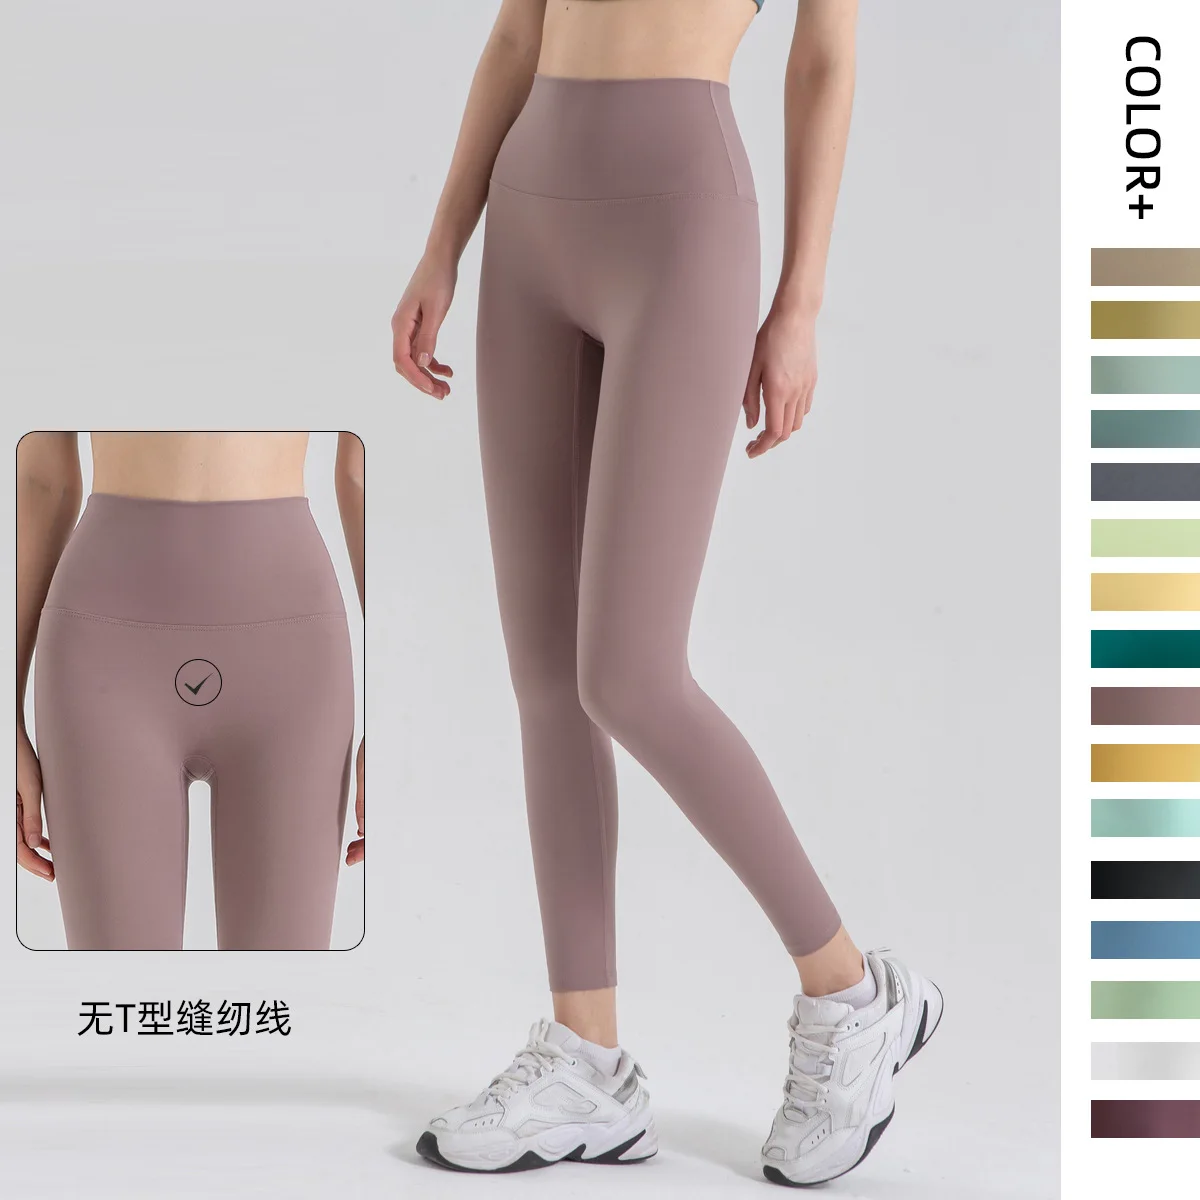 Lulu Spring and Summer New Brushed Nude Yoga Pants No Embarrassment Line High Waist Hip Lifting Elastic Fitness Training Pants